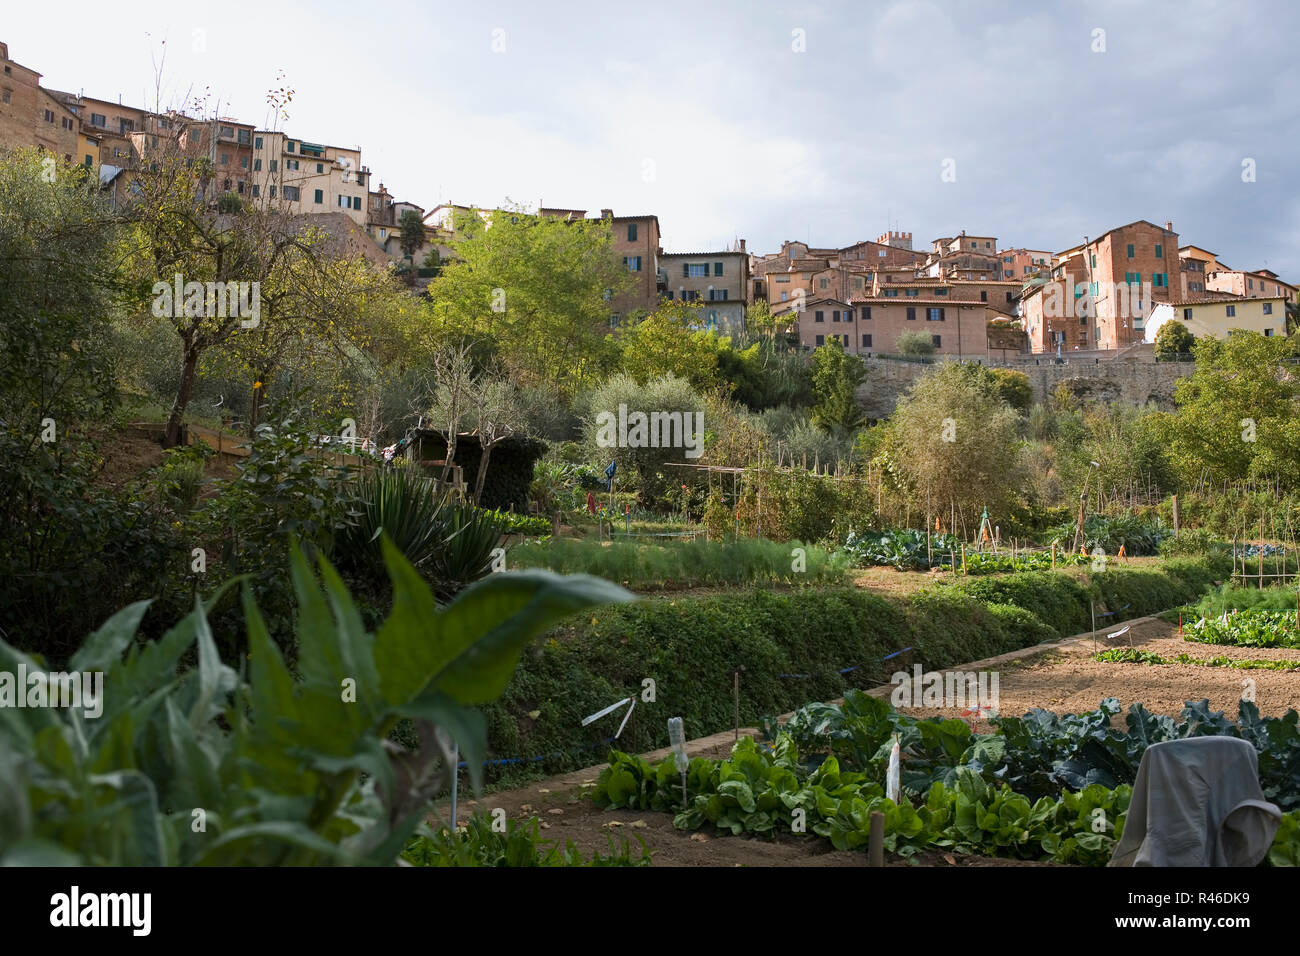 Orto de'Pecci, a lovely area of working community-run allotment gardens in the heart of Siena, Tuscany, Italy Stock Photo